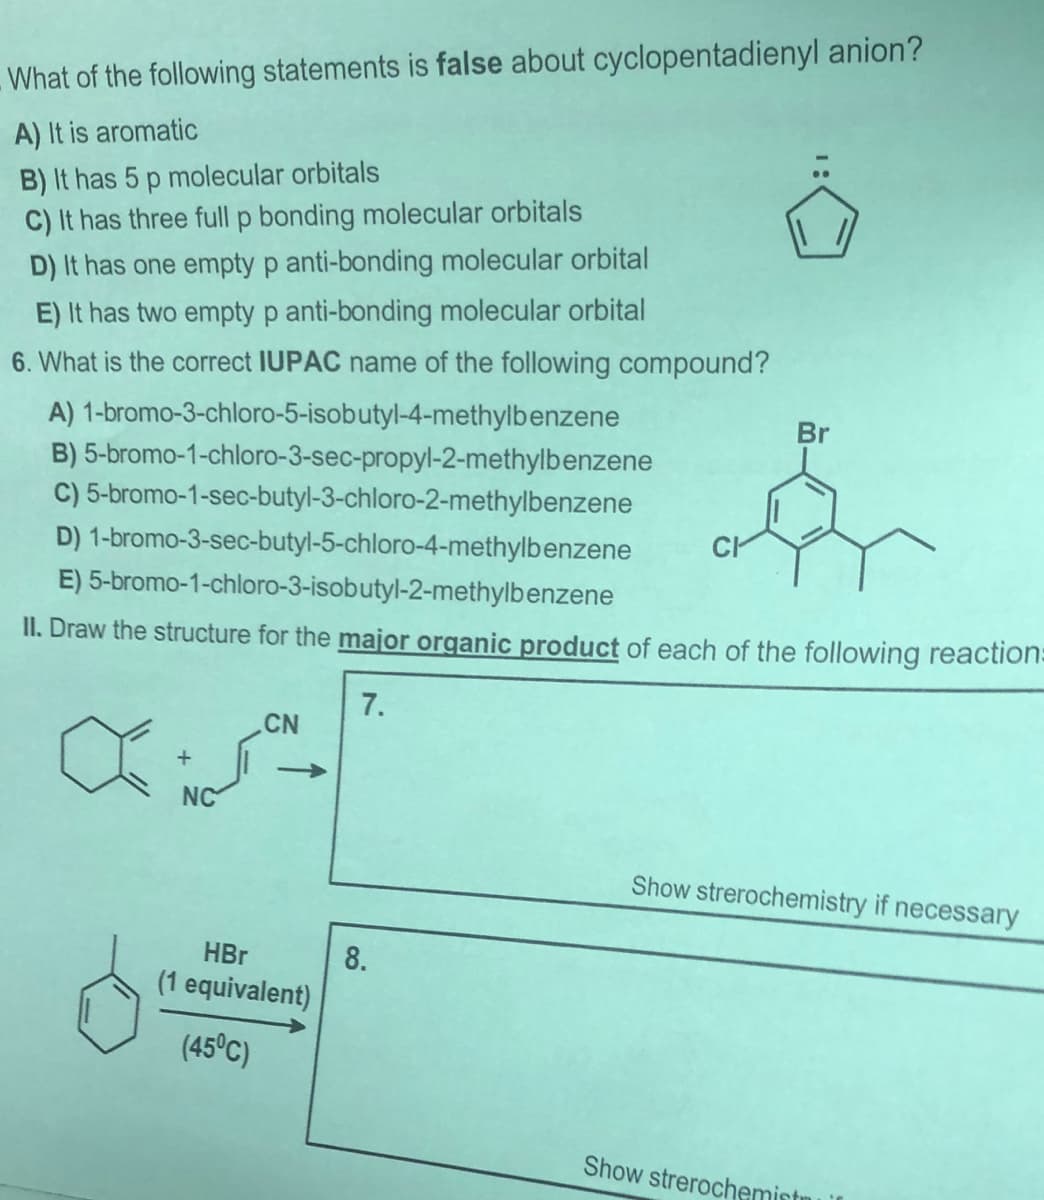 -What of the following statements is false about cyclopentadienyl anion?
A) It is aromatic
B) It has 5 p molecular orbitals
C) It has three full p bonding molecular orbitals
D) It has one empty p anti-bonding molecular orbital
E) It has two empty p anti-bonding molecular orbital
6. What is the correct IUPAC name of the following compound?
A) 1-bromo-3-chloro-5-isobutyl-4-methylbenzene
B) 5-bromo-1-chloro-3-sec-propyl-2-methylbenzene
C) 5-bromo-1-sec-butyl-3-chloro-2-methylbenzene
Br
D) 1-bromo-3-sec-butyl-5-chloro-4-methylbenzene
E) 5-bromo-1-chloro-3-isobutyl-2-methylbenzene
II. Draw the structure for the major organic product of each of the following reaction:
7.
CN
+
->
NC
Show strerochemistry if necessary
HBr
8.
(1 equivalent)
(45°C)
Show strerochemistnu
